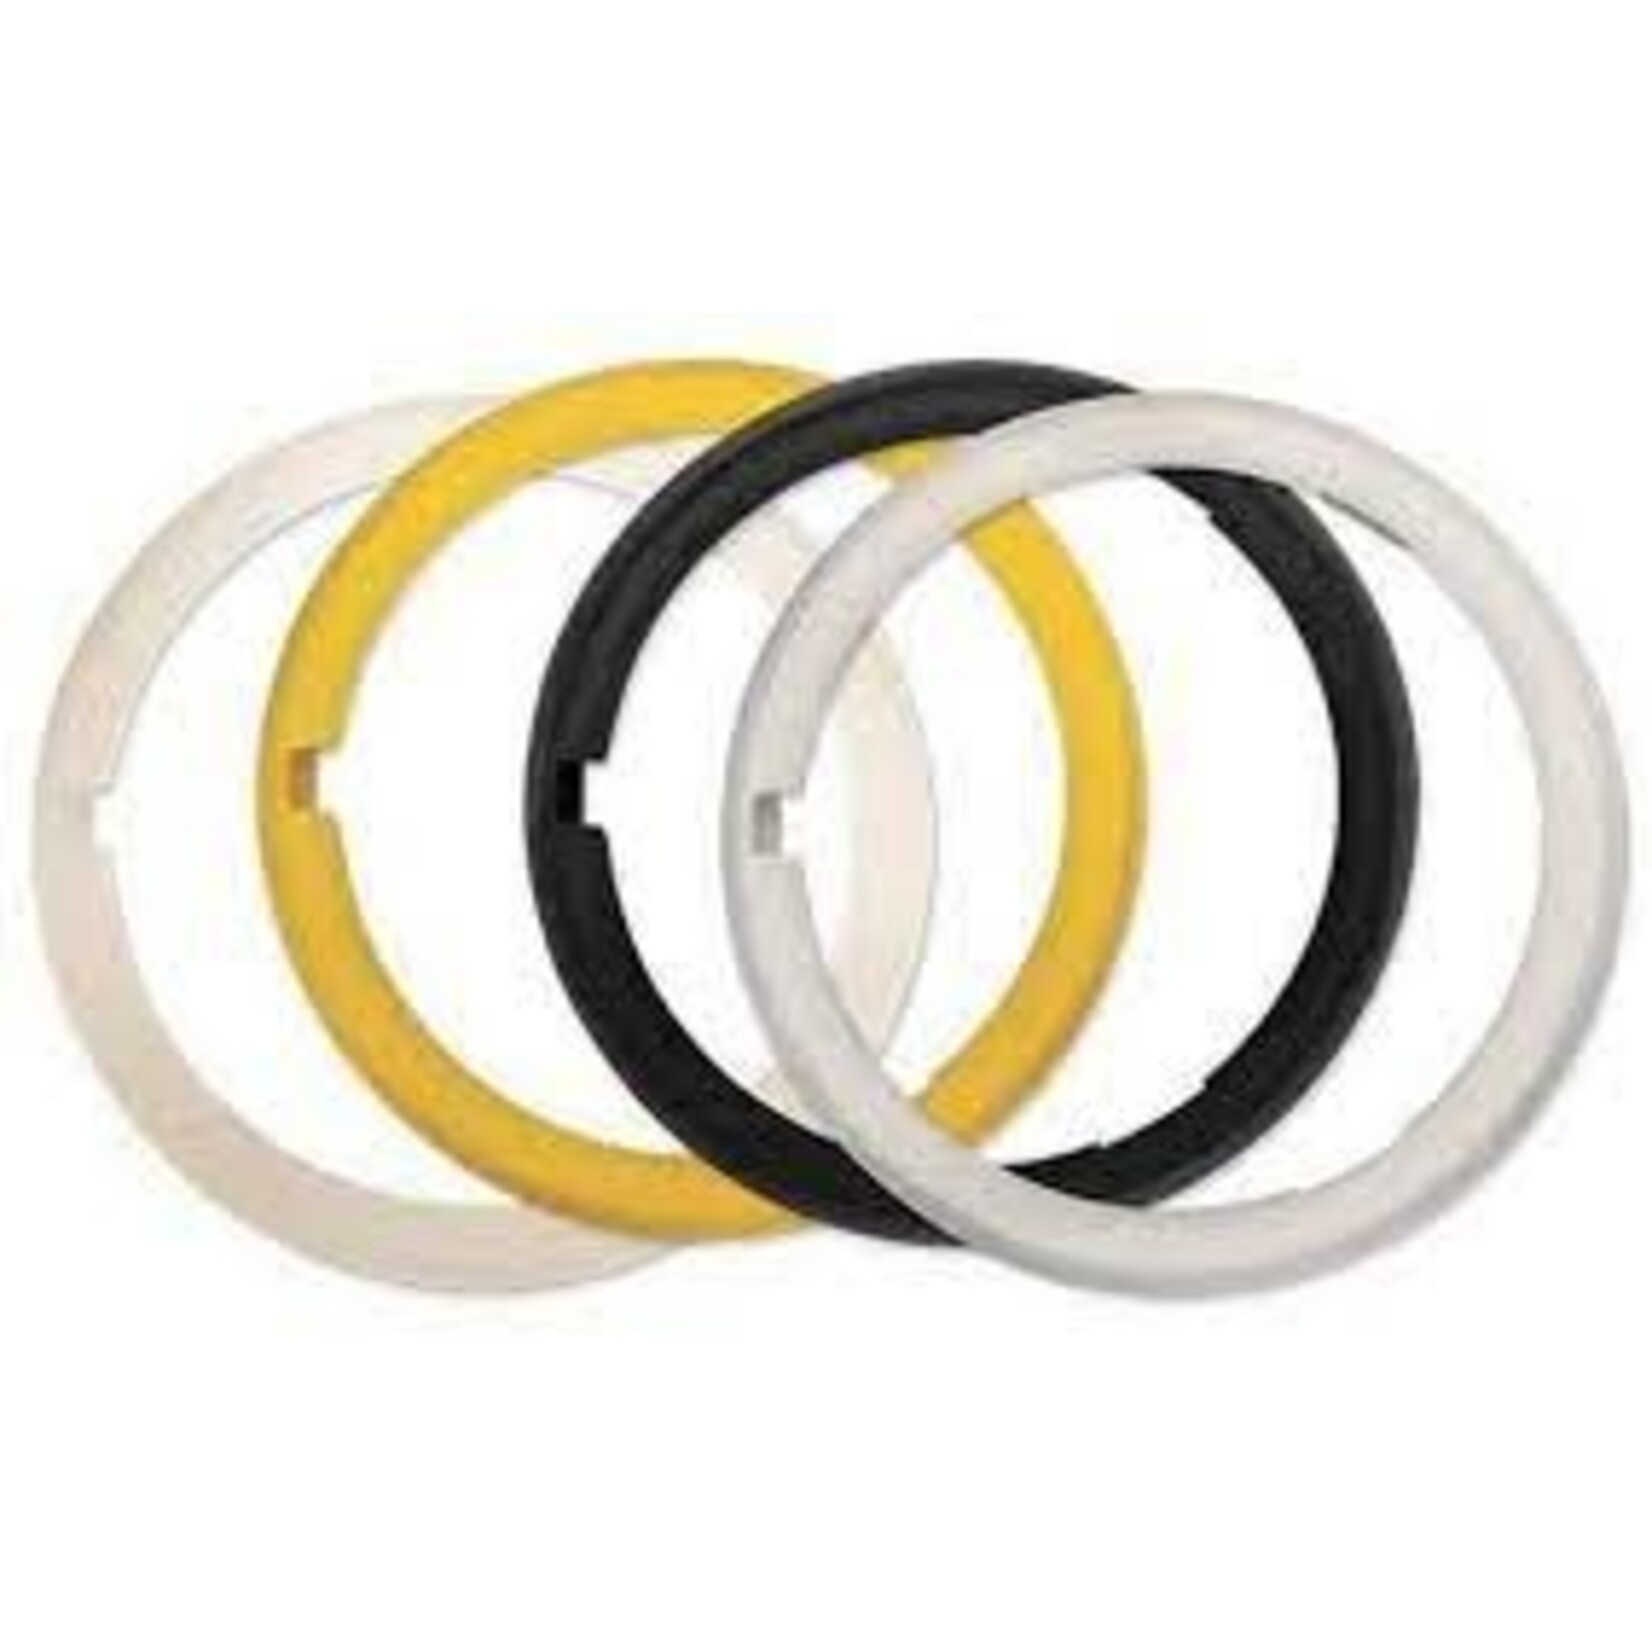 NORMARK CORPORATION LUHR-JENSEN SZ-01 DIPSY DIVER REPLACEMENT RINGS ASSORTED COLOR single